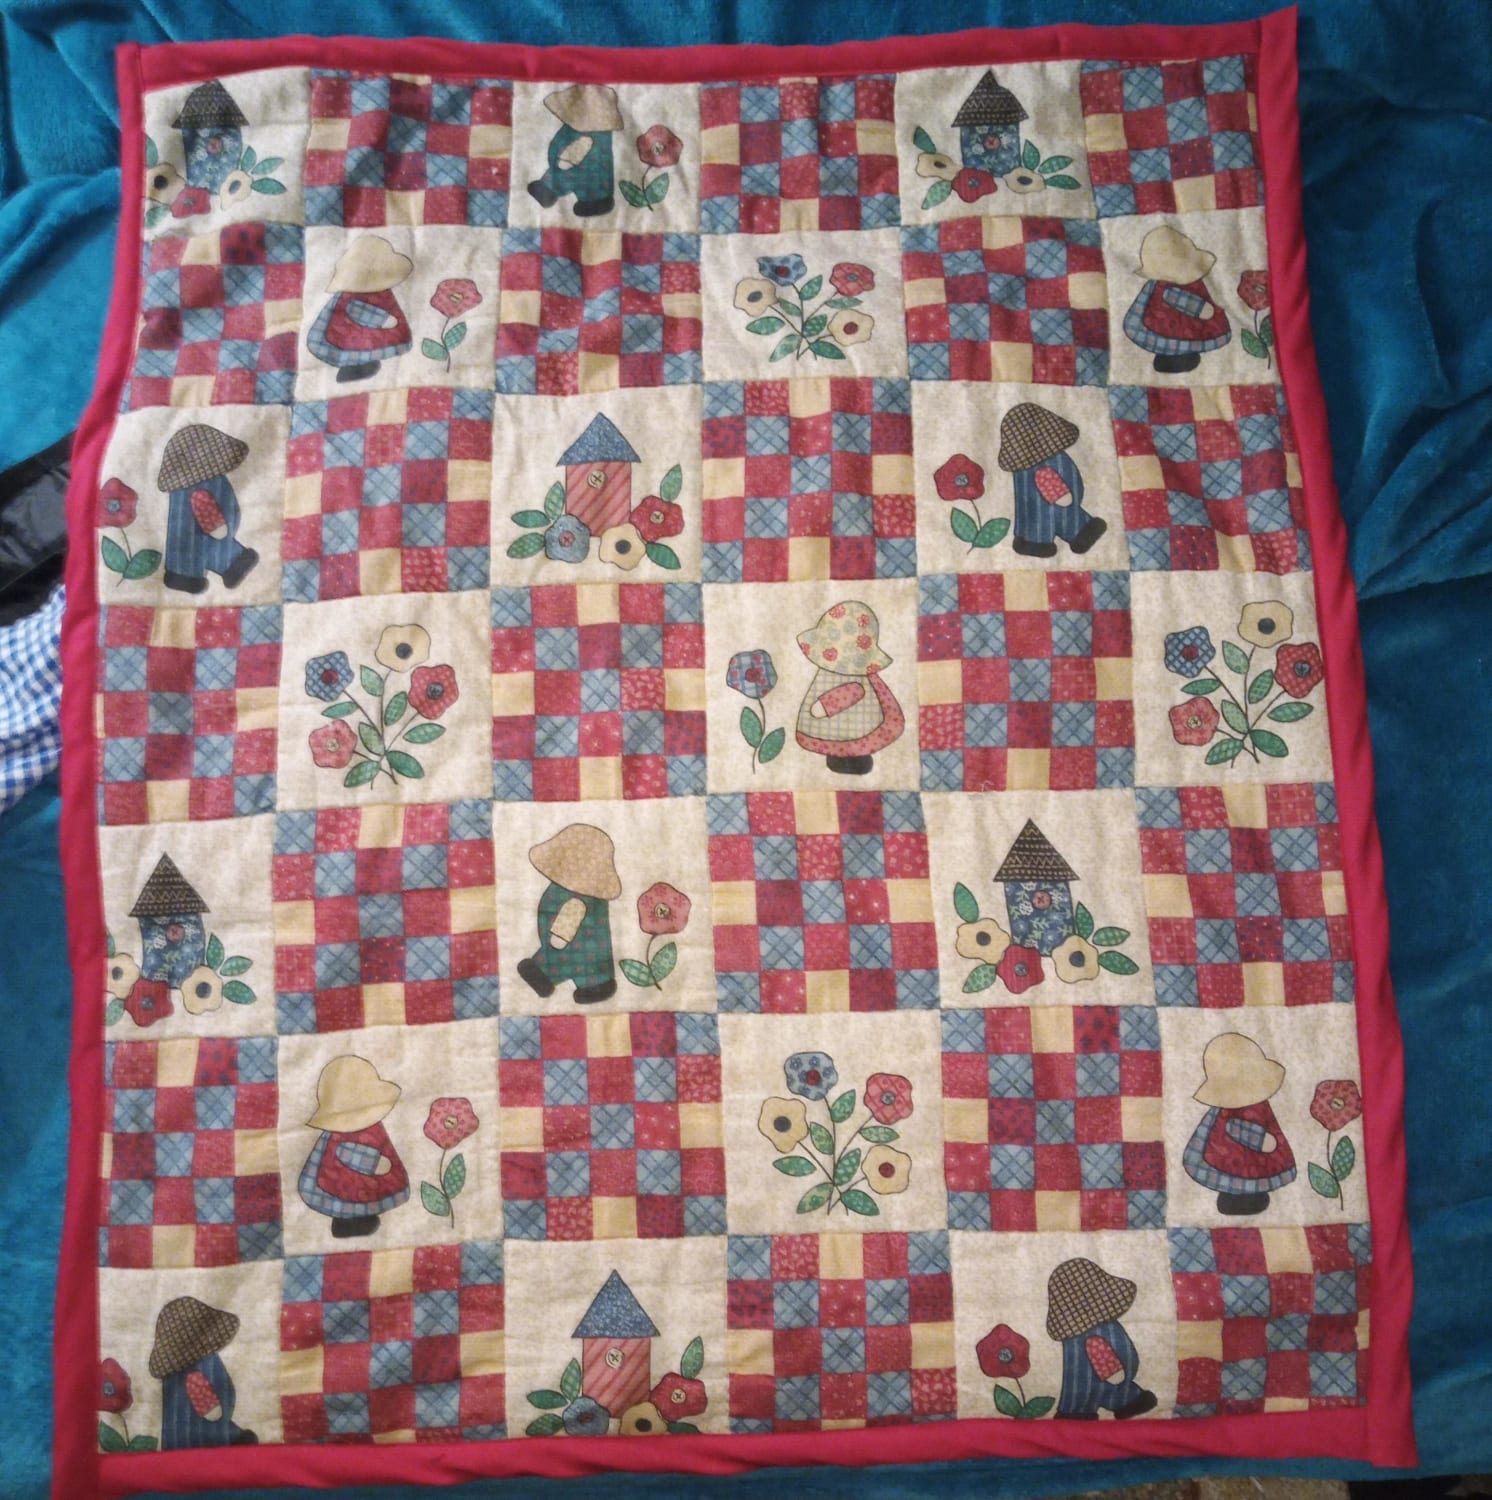 I trimmed all the destroyed parts off my baby quilt and put a new border on. I'm not very experienced, but I'm happy with it.